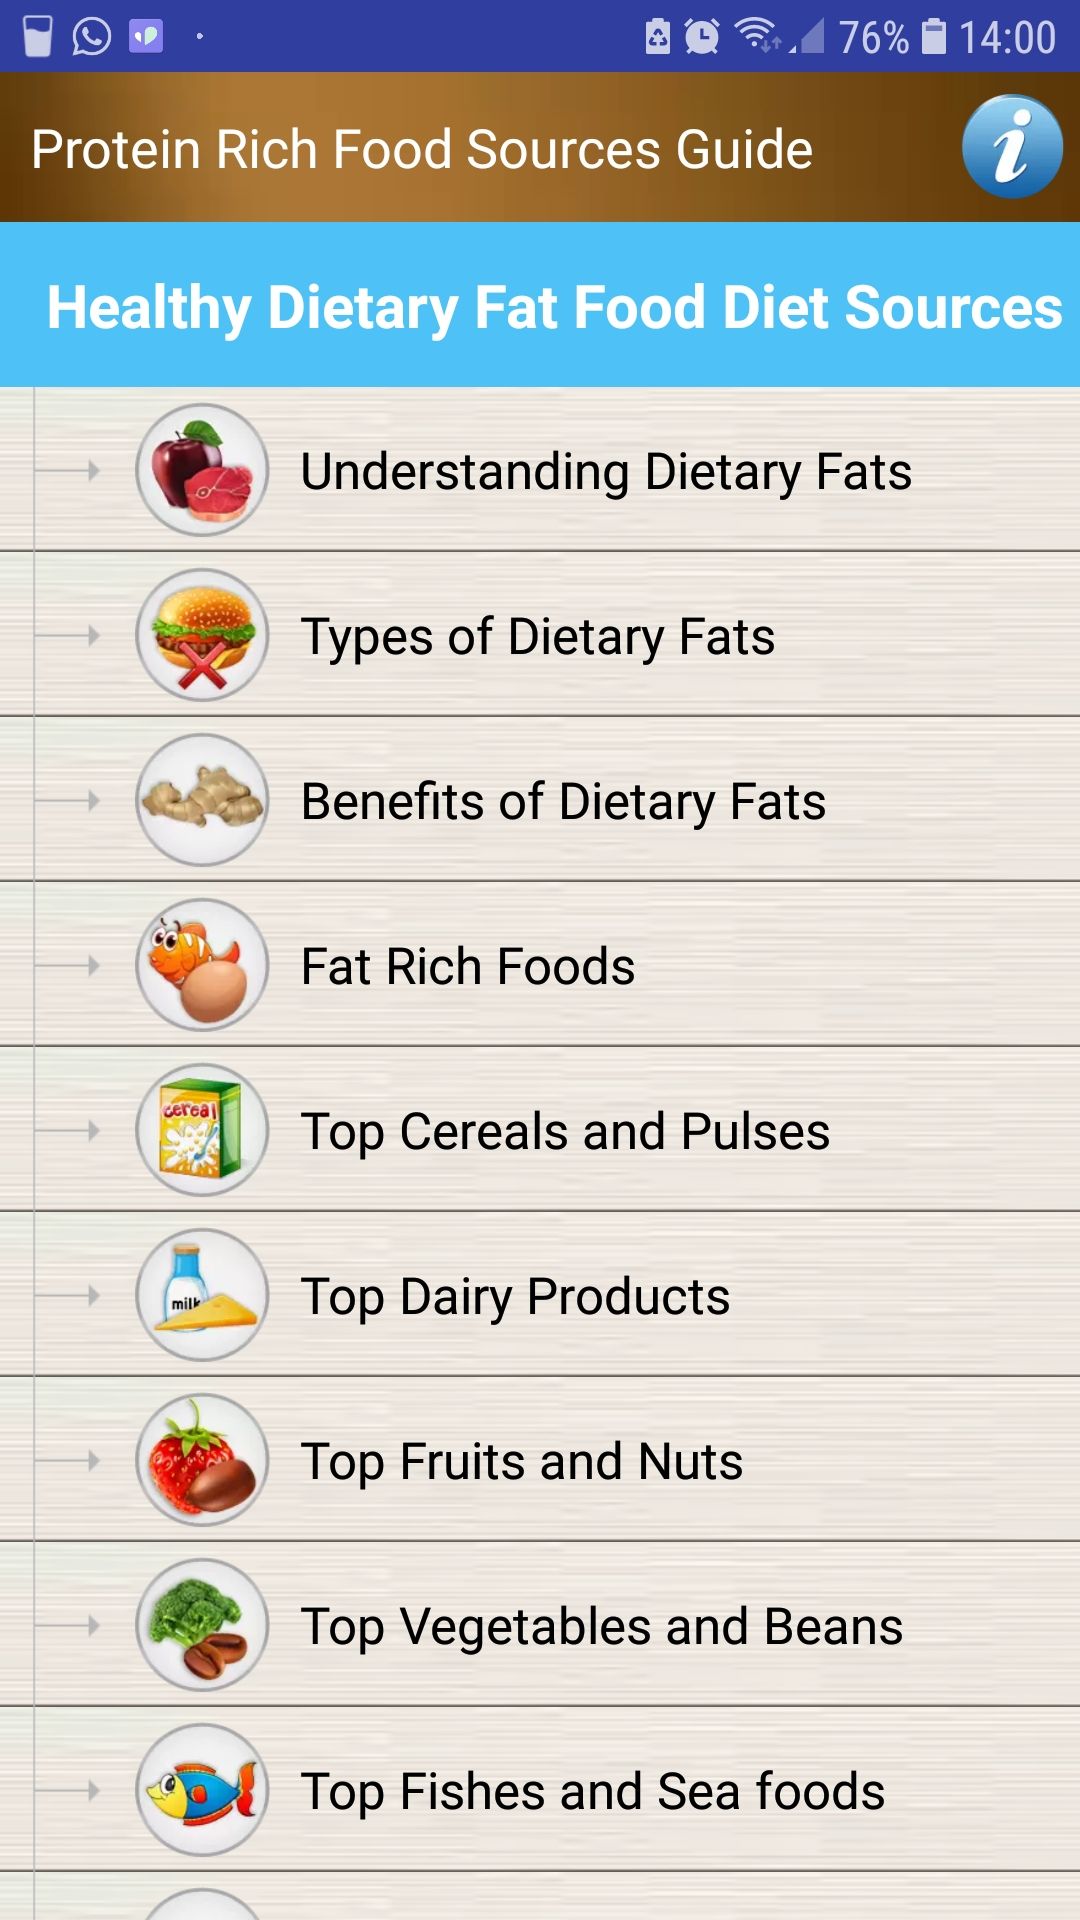 Protein Rich Food Sources Guide mobile app dietary fat